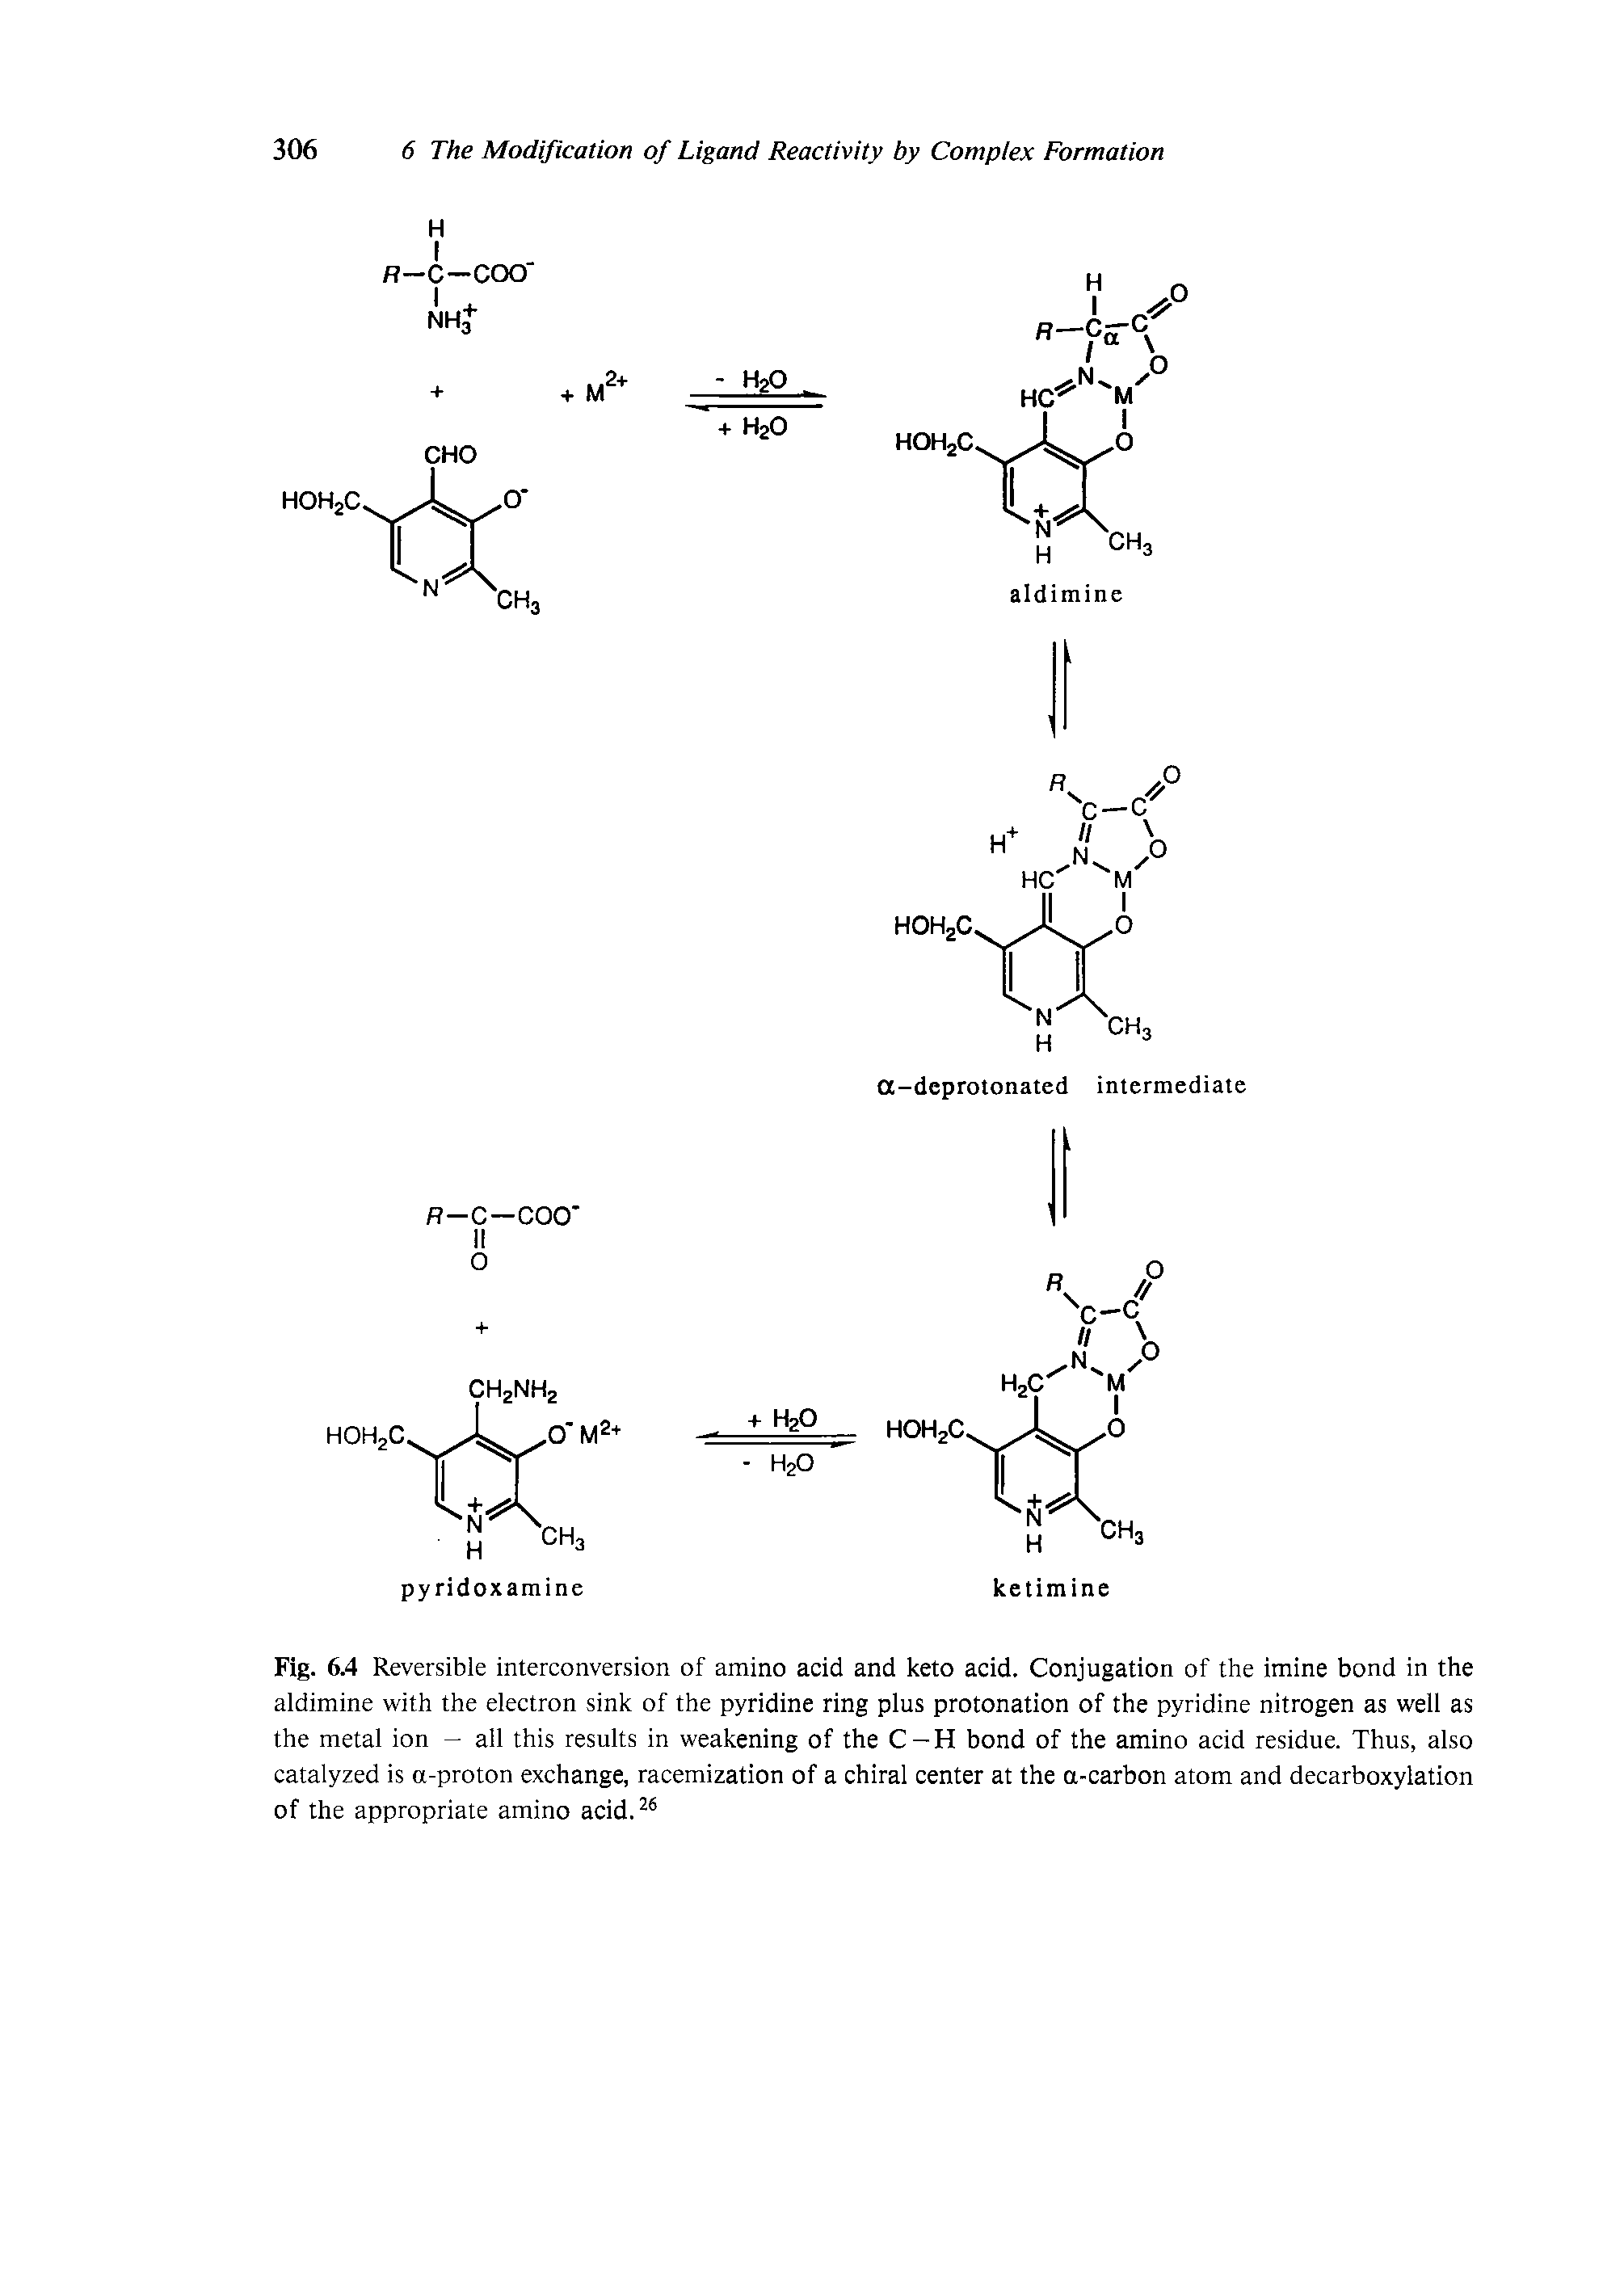 Fig. 6.4 Reversible interconversion of amino acid and keto acid. Conjugation of the imine bond in the aldimine with the electron sink of the pyridine ring plus protonation of the pyridine nitrogen as well as the metal ion - all this results in weakening of the C-H bond of the amino acid residue. Thus, also catalyzed is a-proton exchange, racemization of a chiral center at the a-carbon atom and decarboxylation of the appropriate amino acid. ...